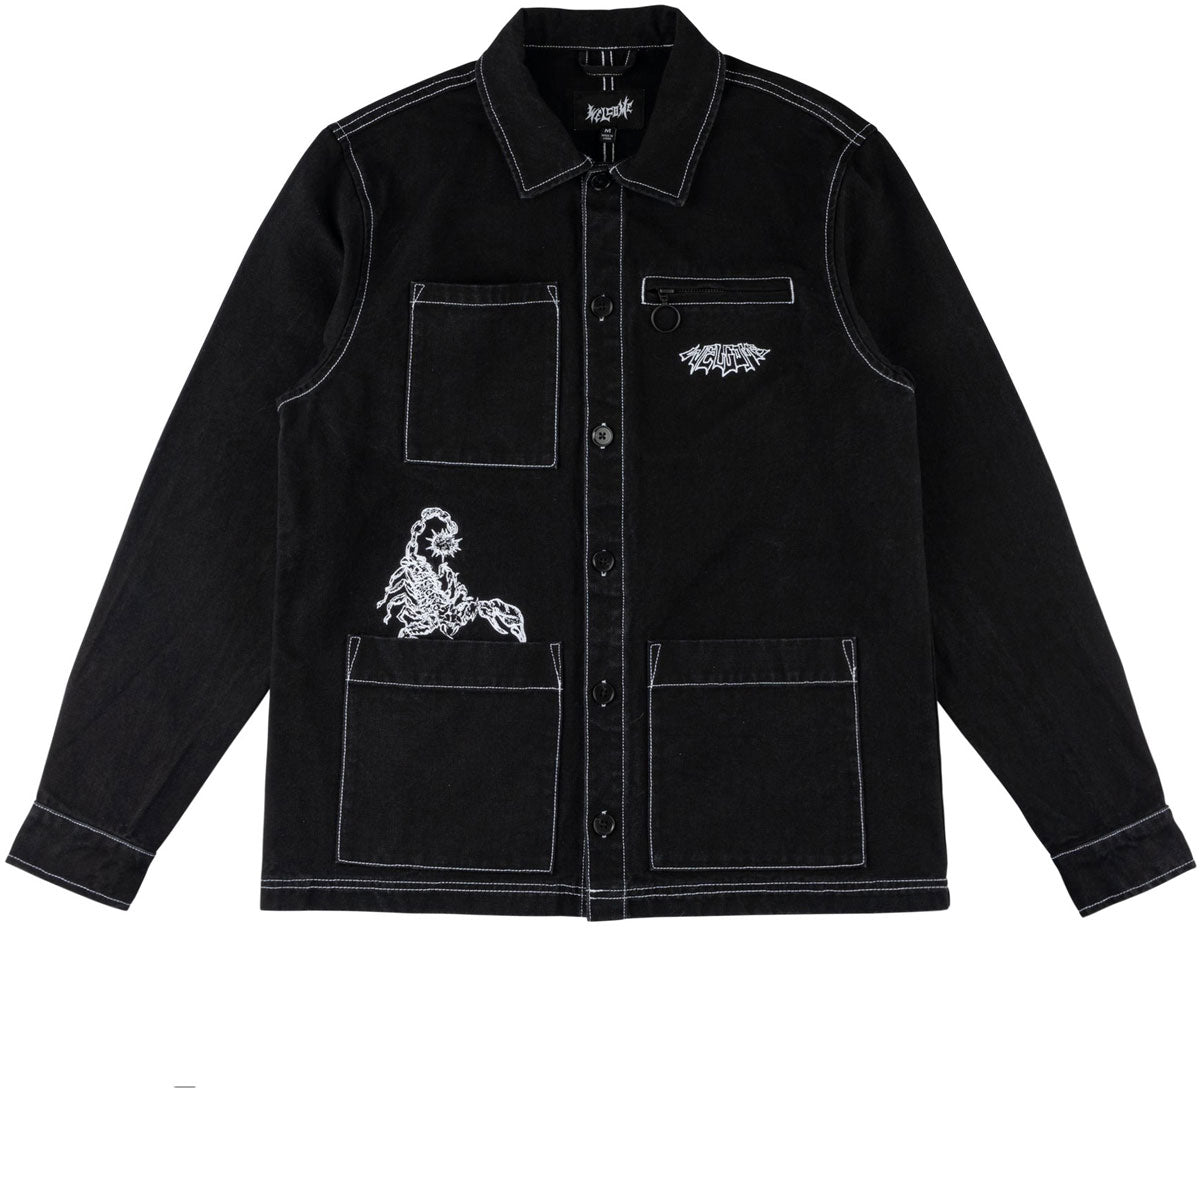 Welcome Stowaway Canvas Chore Jacket - Black image 1